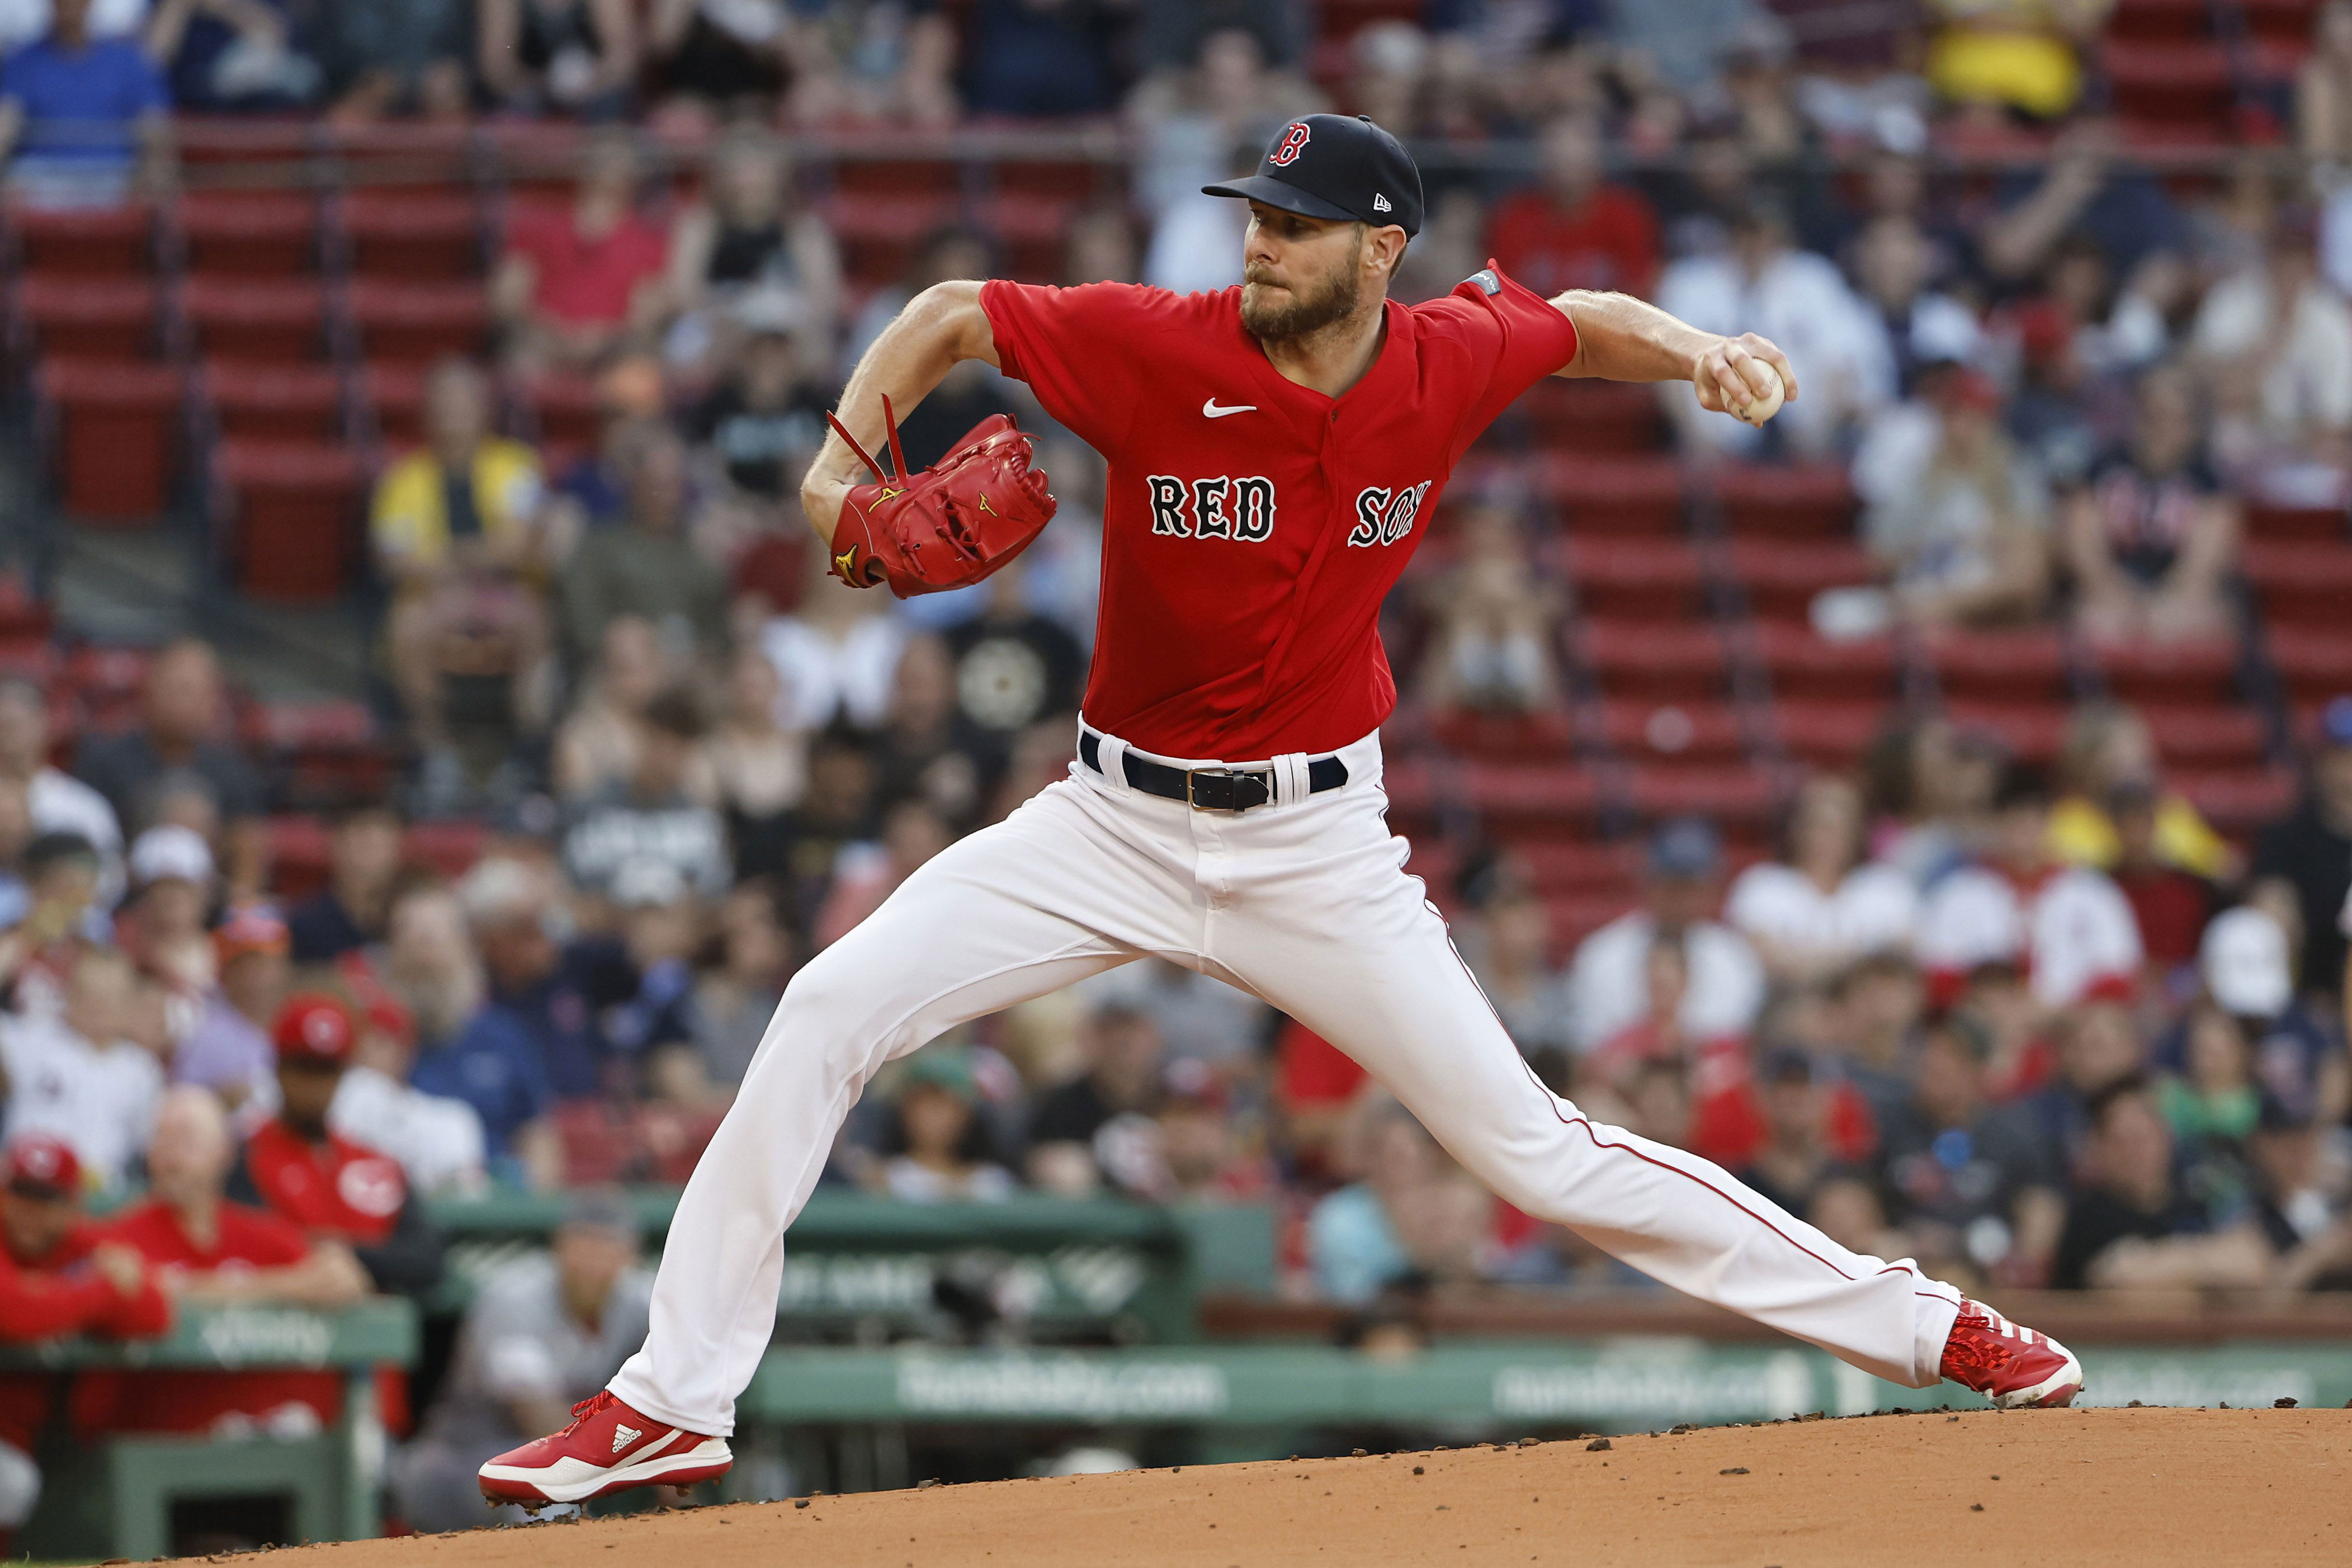 Sale retires 1st 14 batters in return from injury as Sox roll